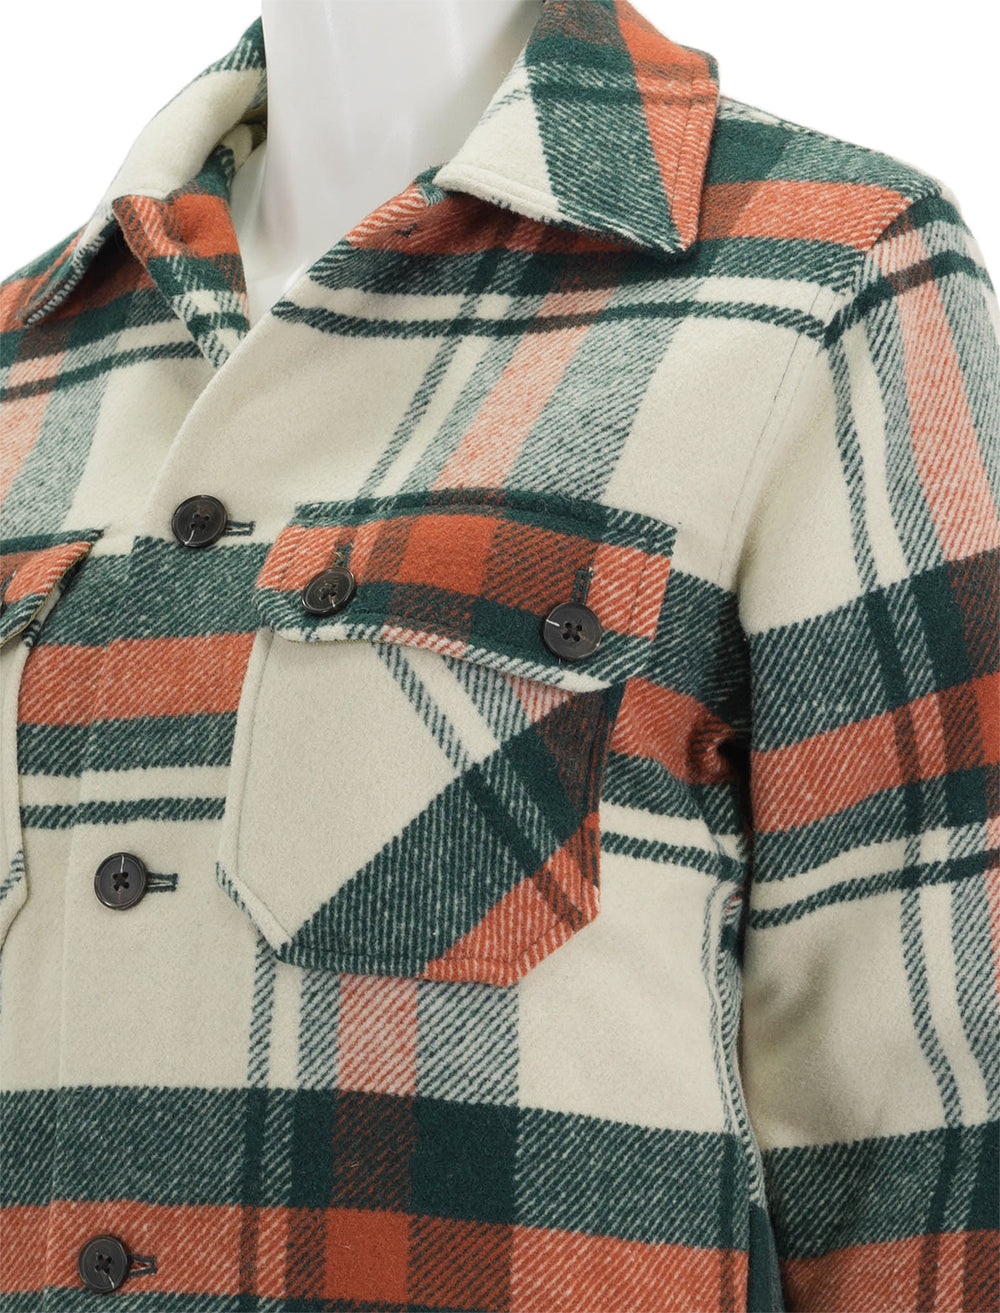 Close-up view of The Great's the smith jacket.